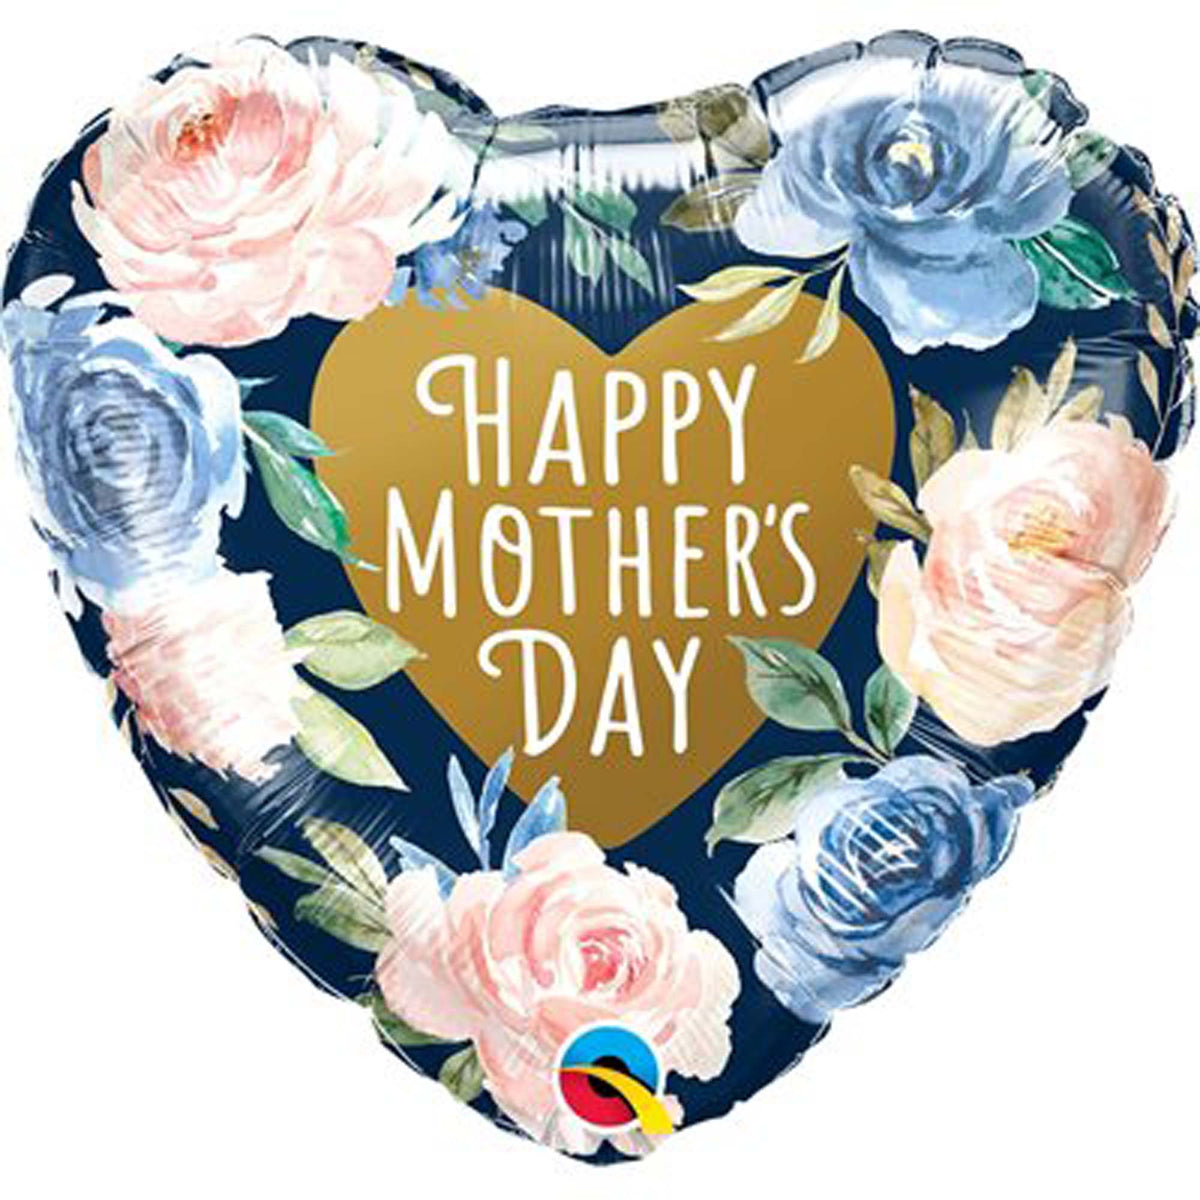 LE GROUPE BLC INTL INC Balloons "Happy Mother's Day" Heart-Shaped Foil Balloon, Blue and Pink Roses, 18 inches, 1 Count